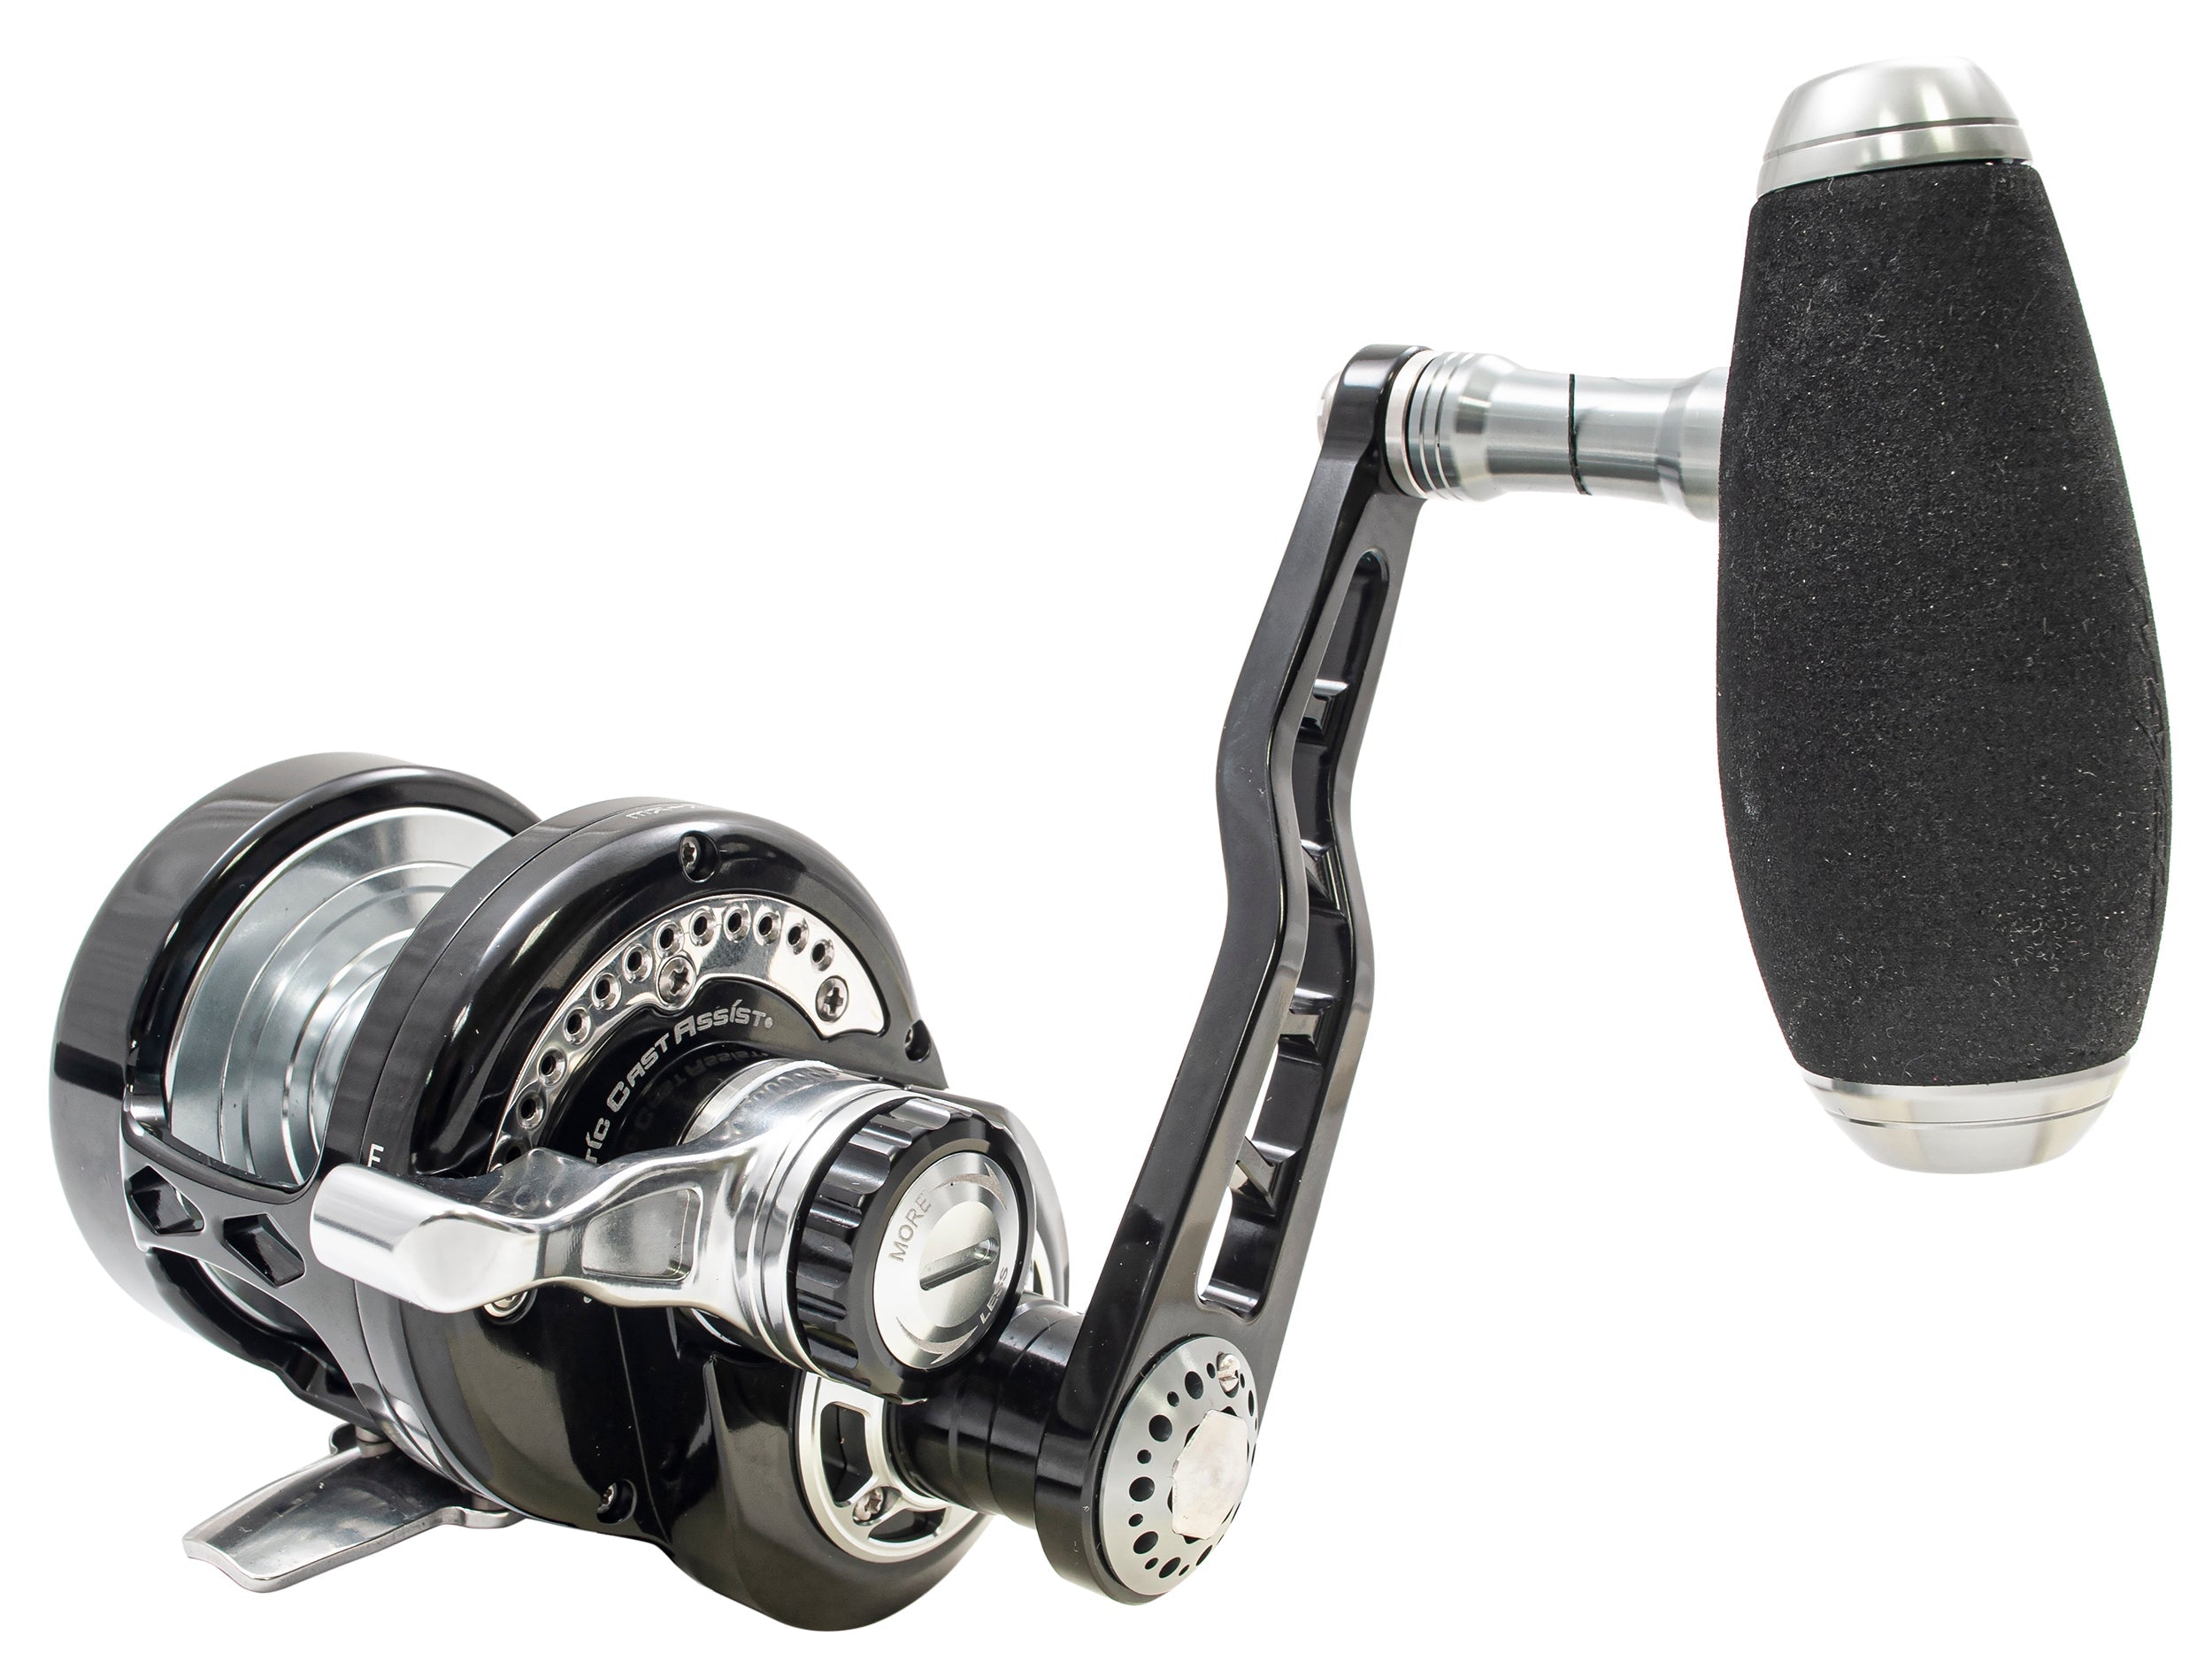 OMX Slow Pitch Jigging Conventional Reel